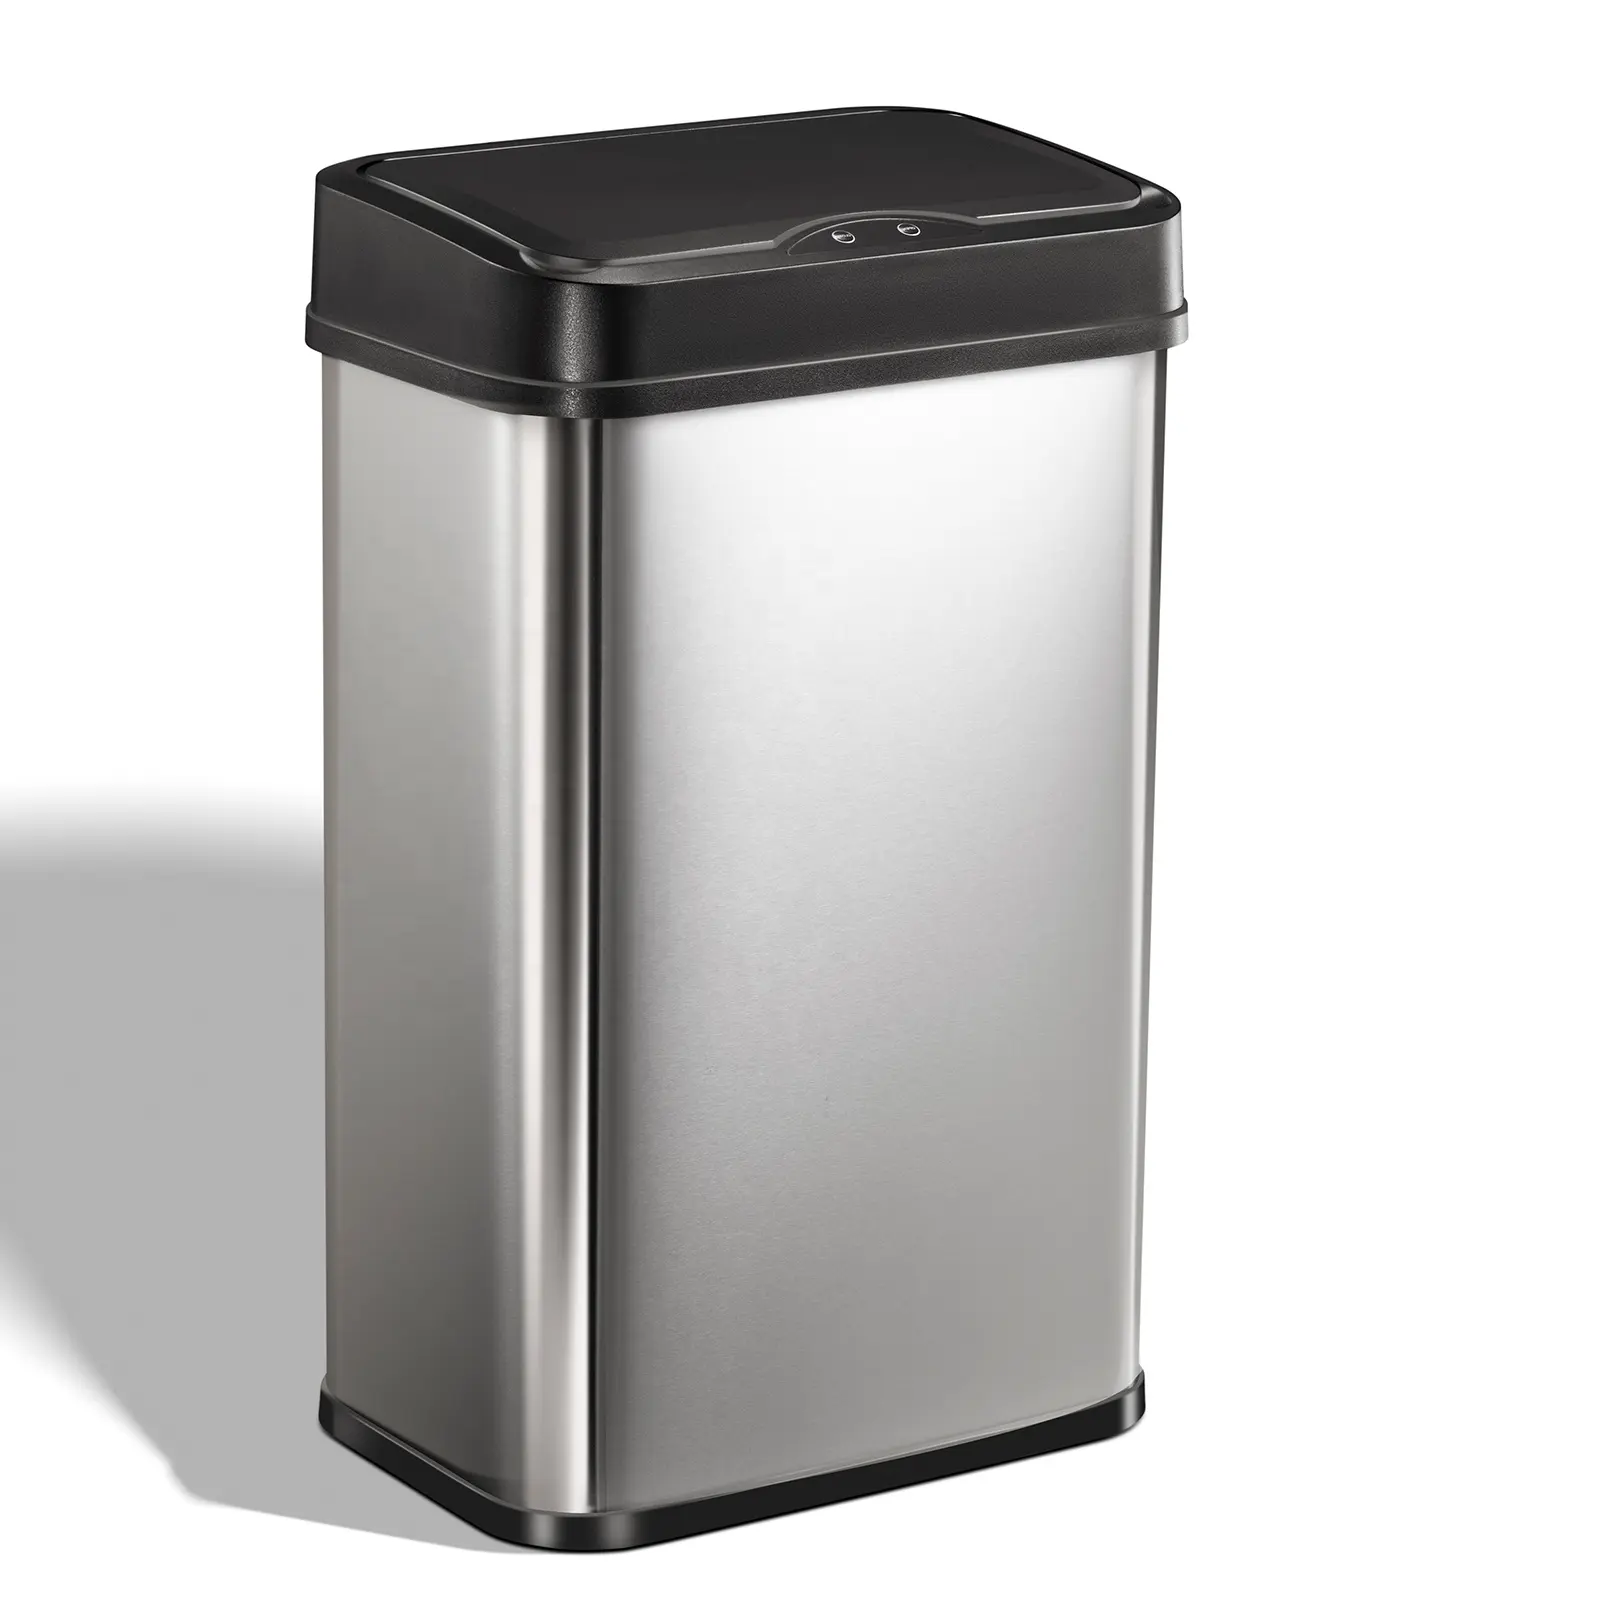 50L Stainless Steel Waste Bin With Plastic Sensor Lid Smart Garbege Trash Can Home Products For Kitchen